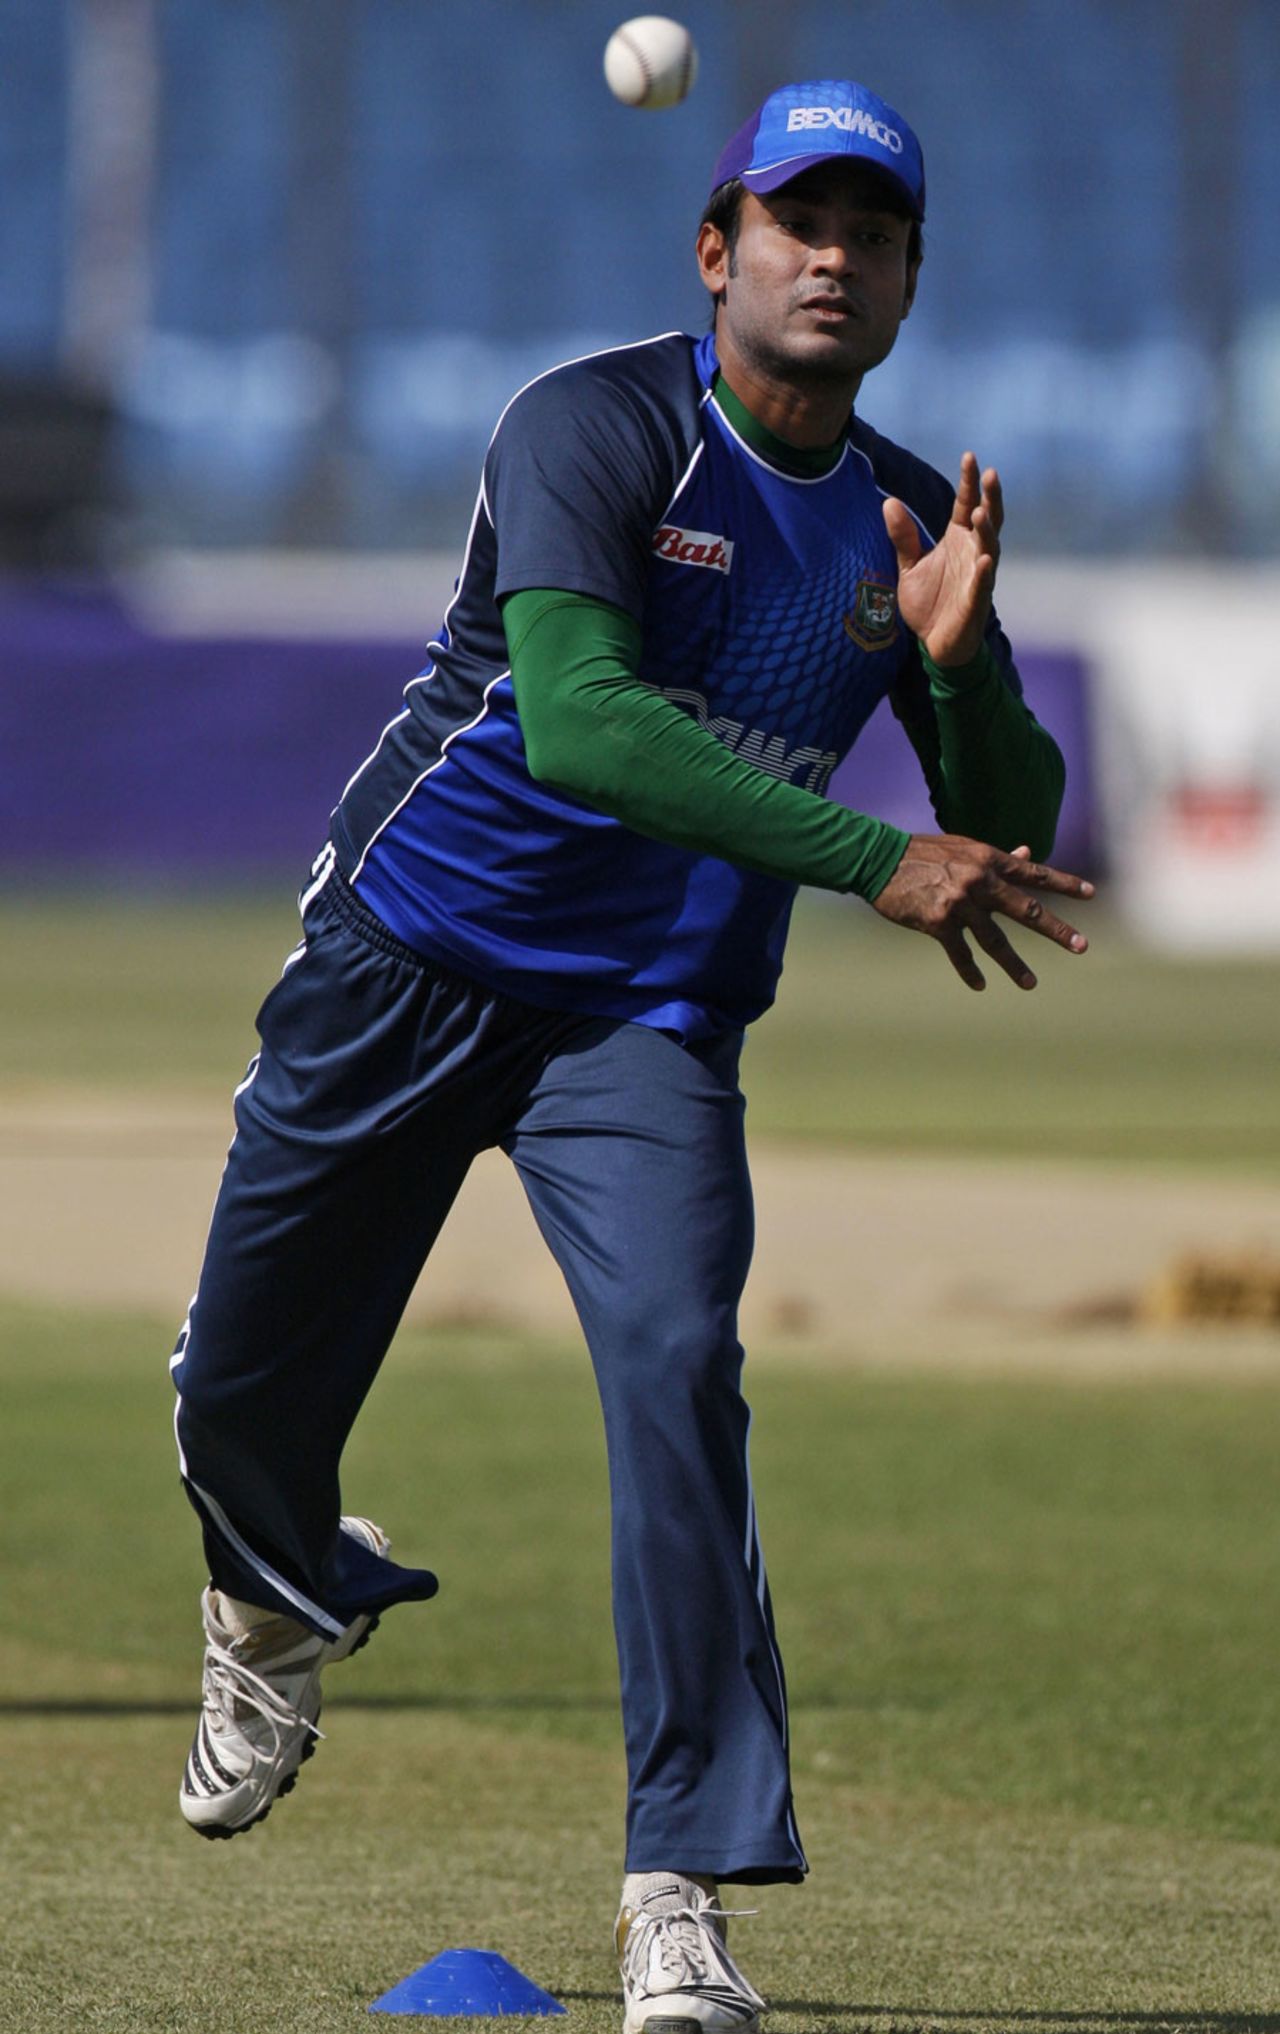 Junaid Siddique practises his throwing, Chittagong, March 9, 2011